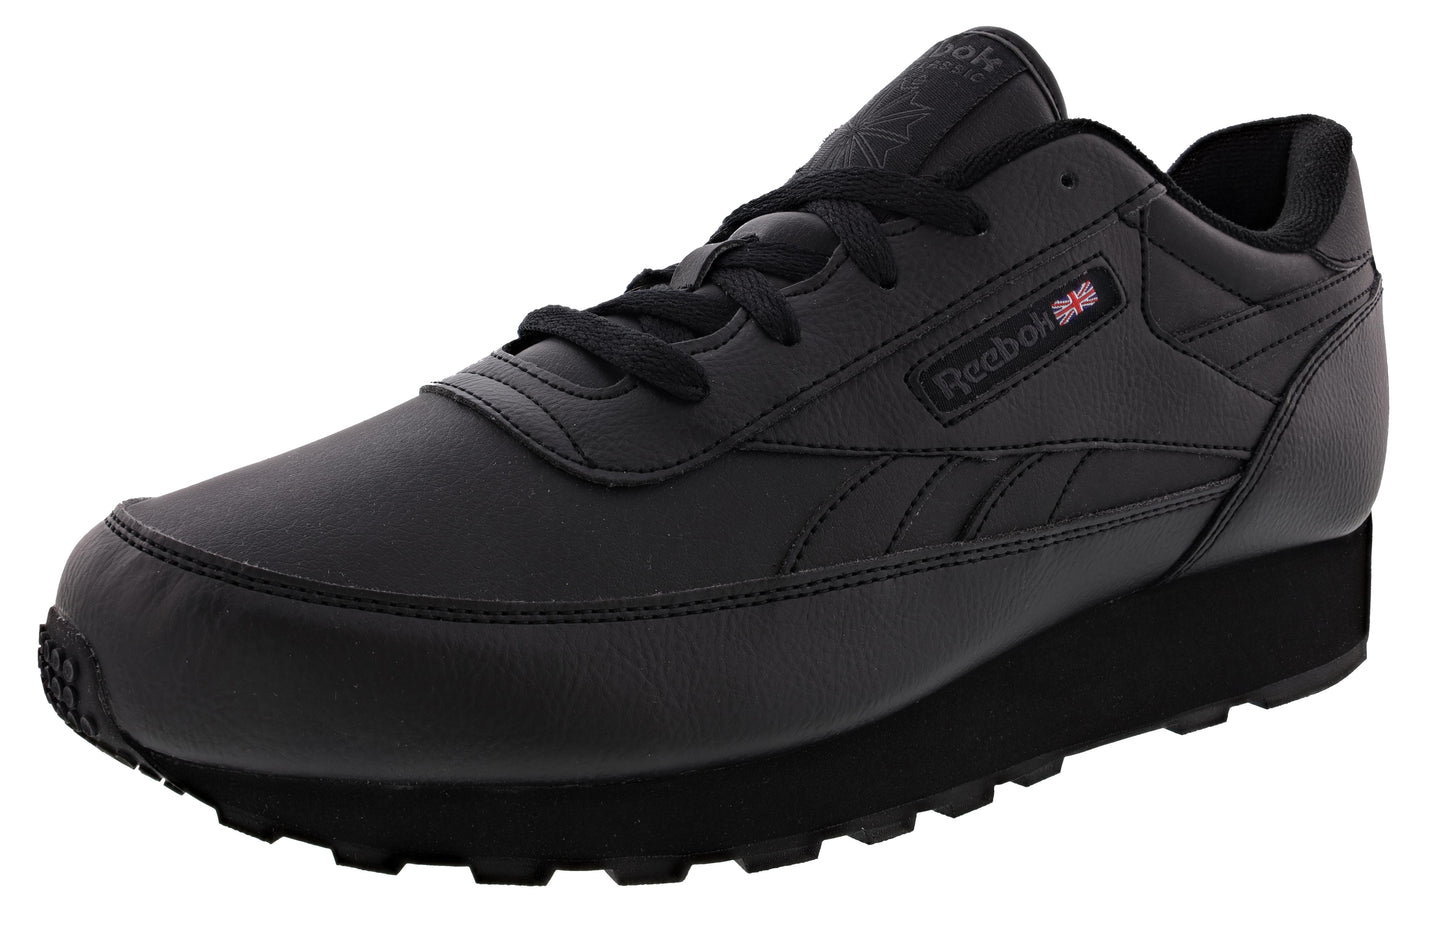 Reebok Classic Sneakers Online for Mens and Womens